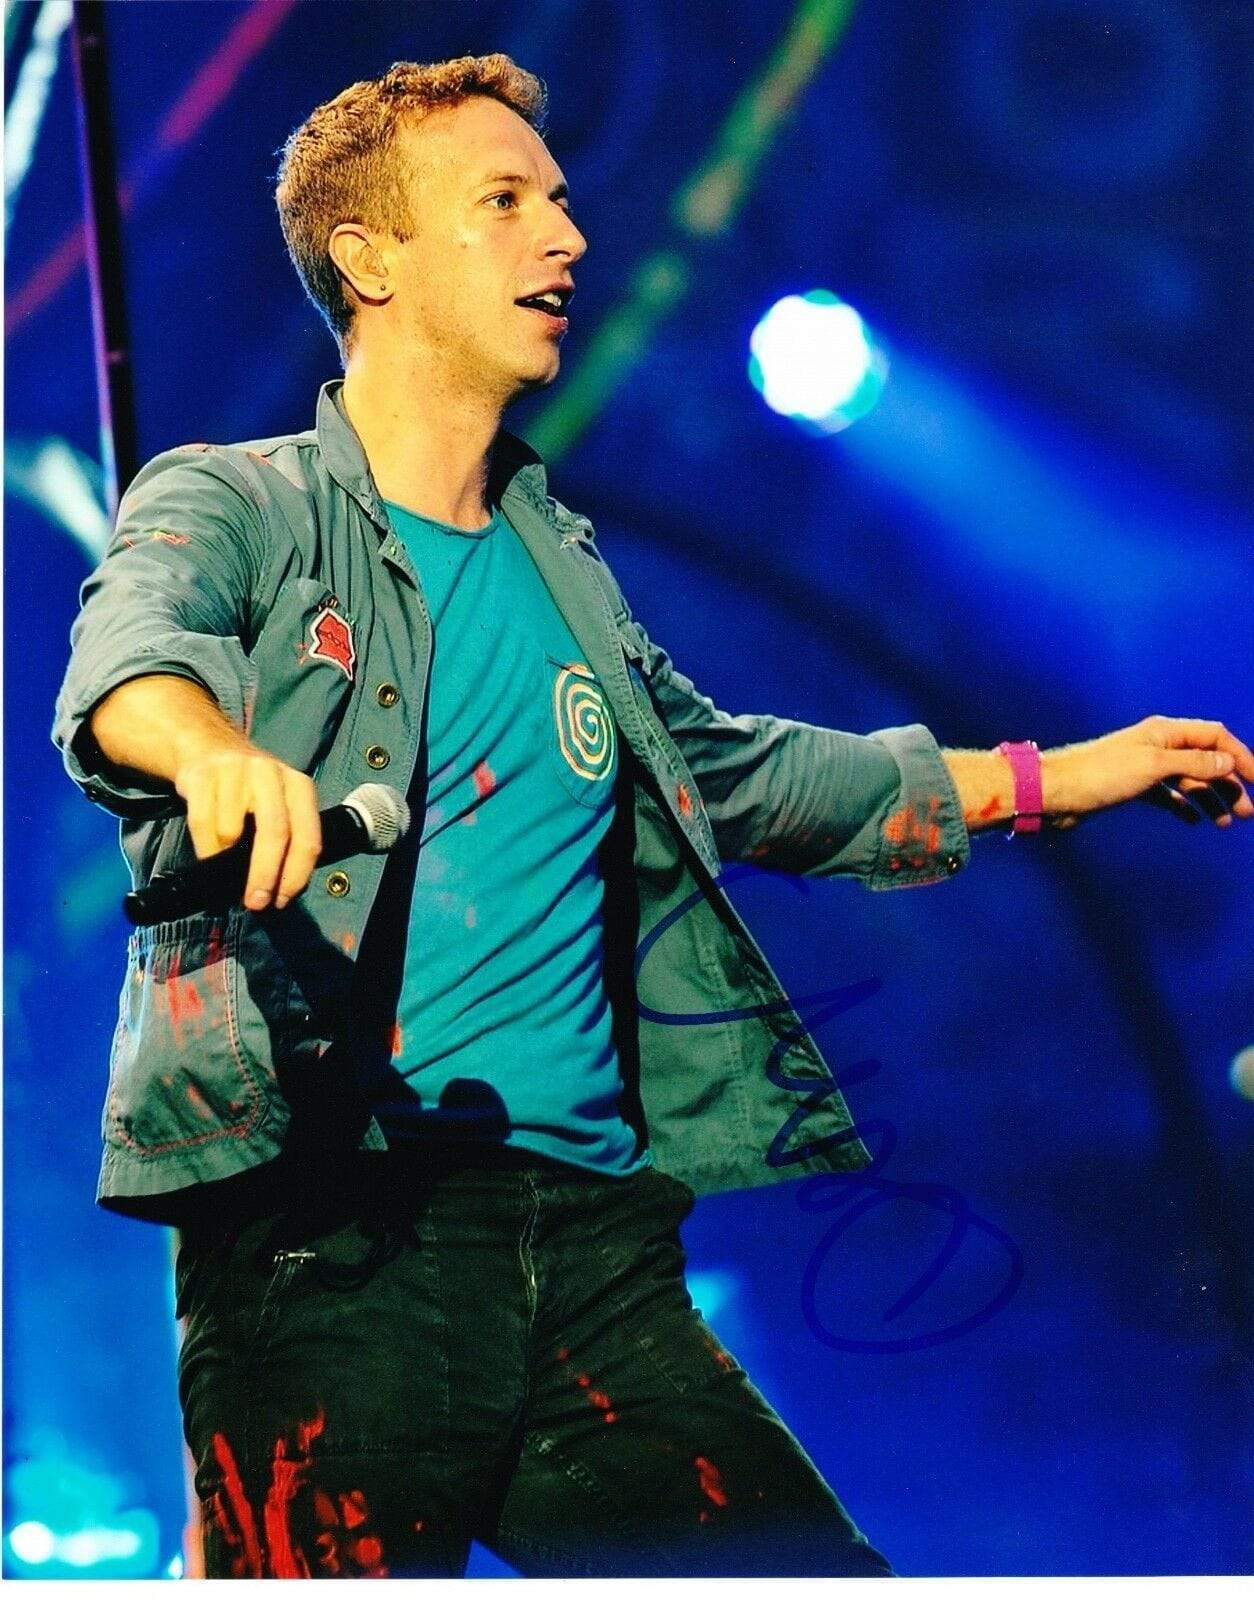 Chris Martin of Coldplay Authentic Autographed 8x10 Photo - Prime Time Signatures - Music